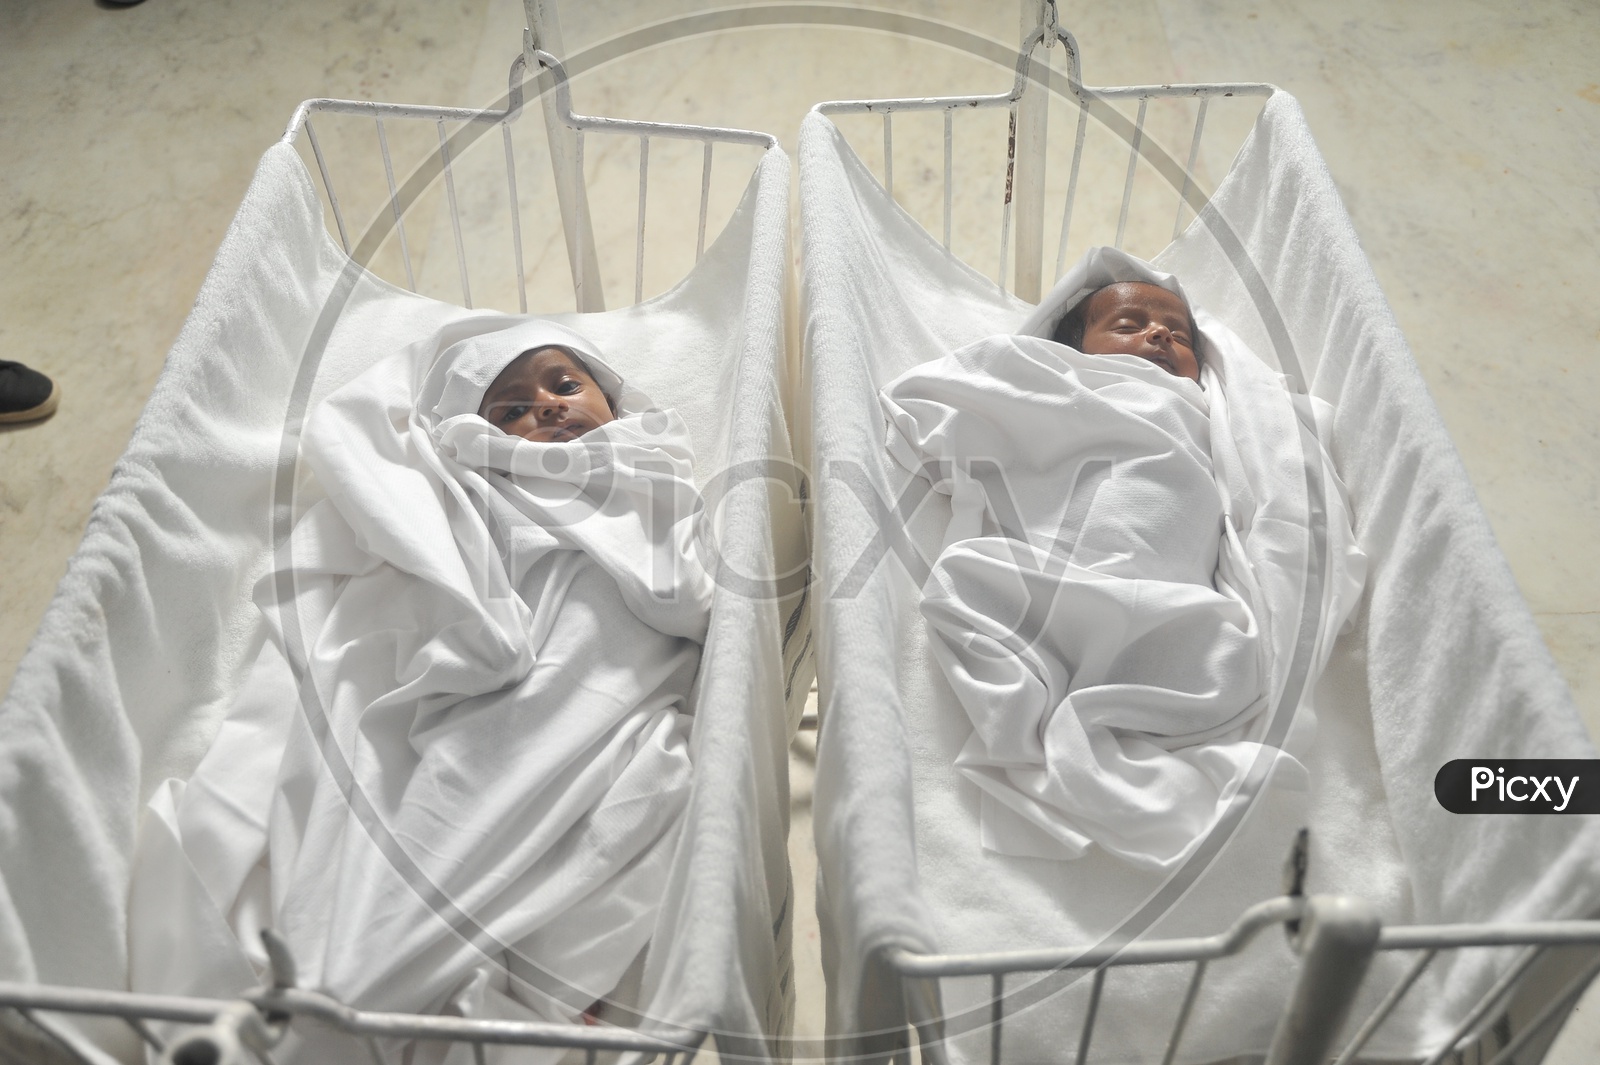 Twins New Born Baby Child In Hospital Swing